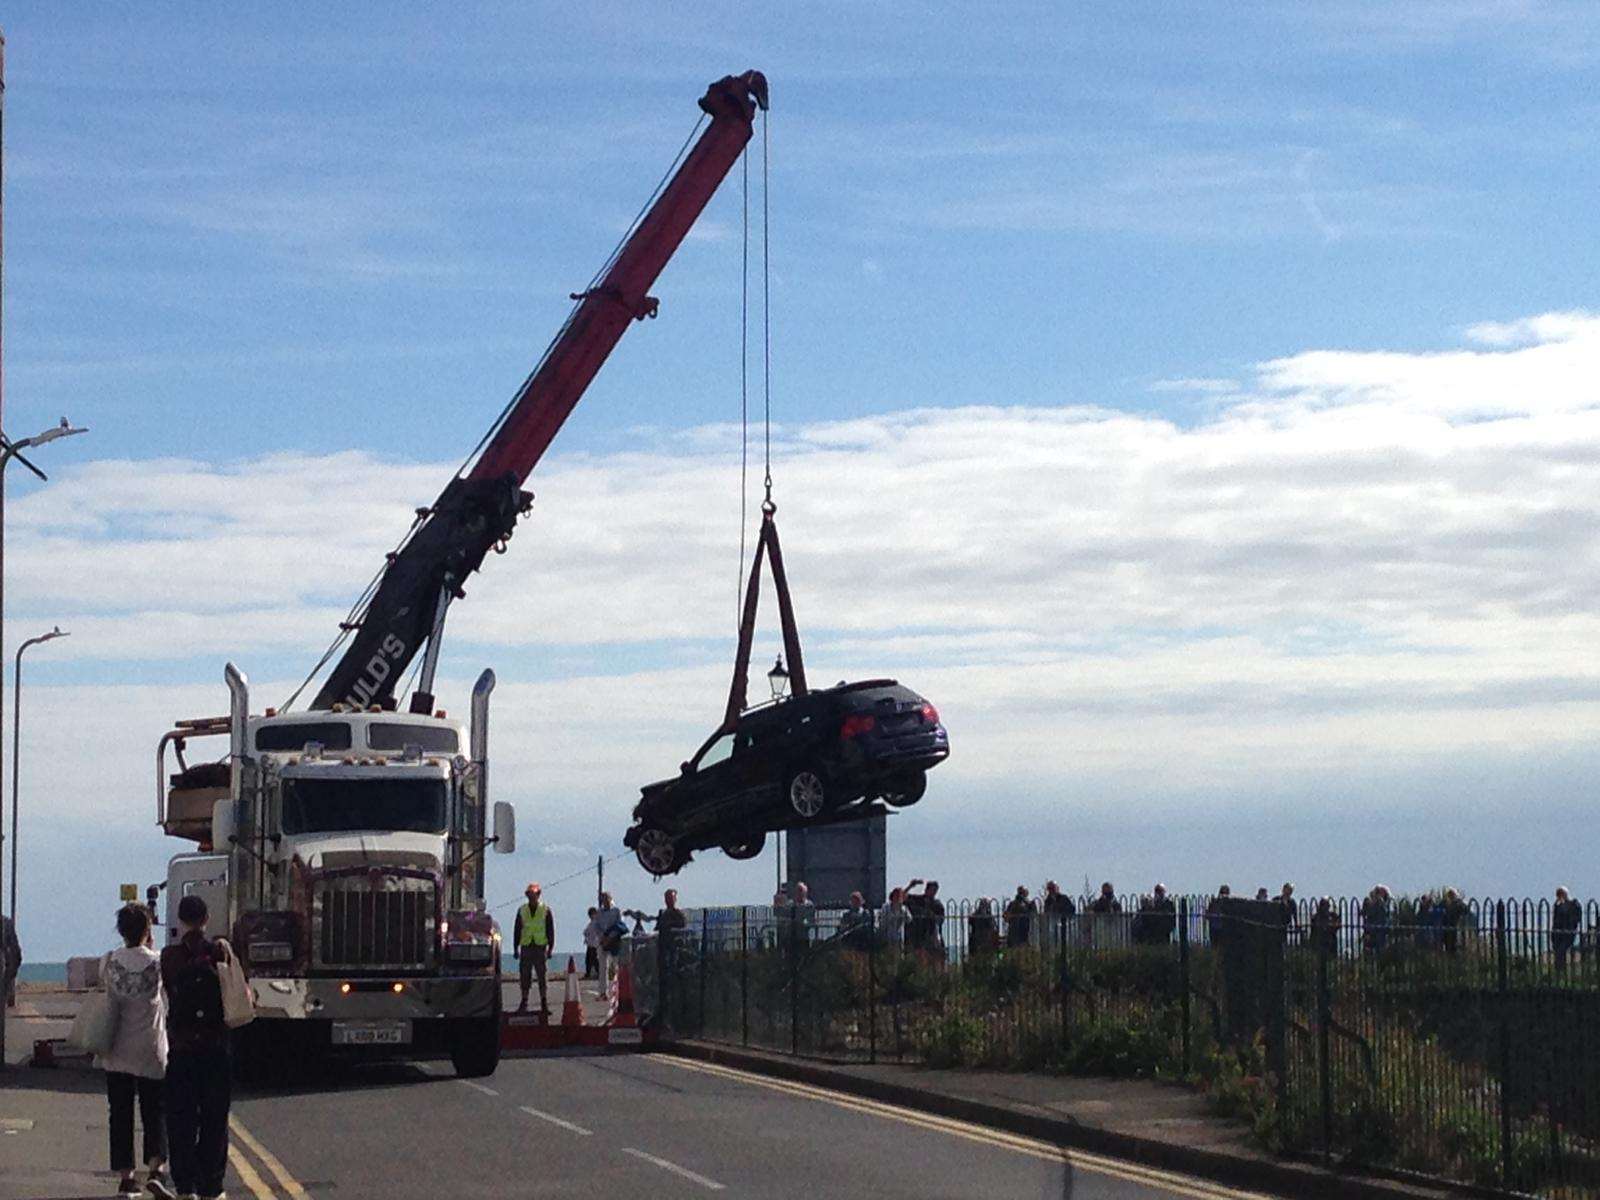 The car was hoisted out by a crane